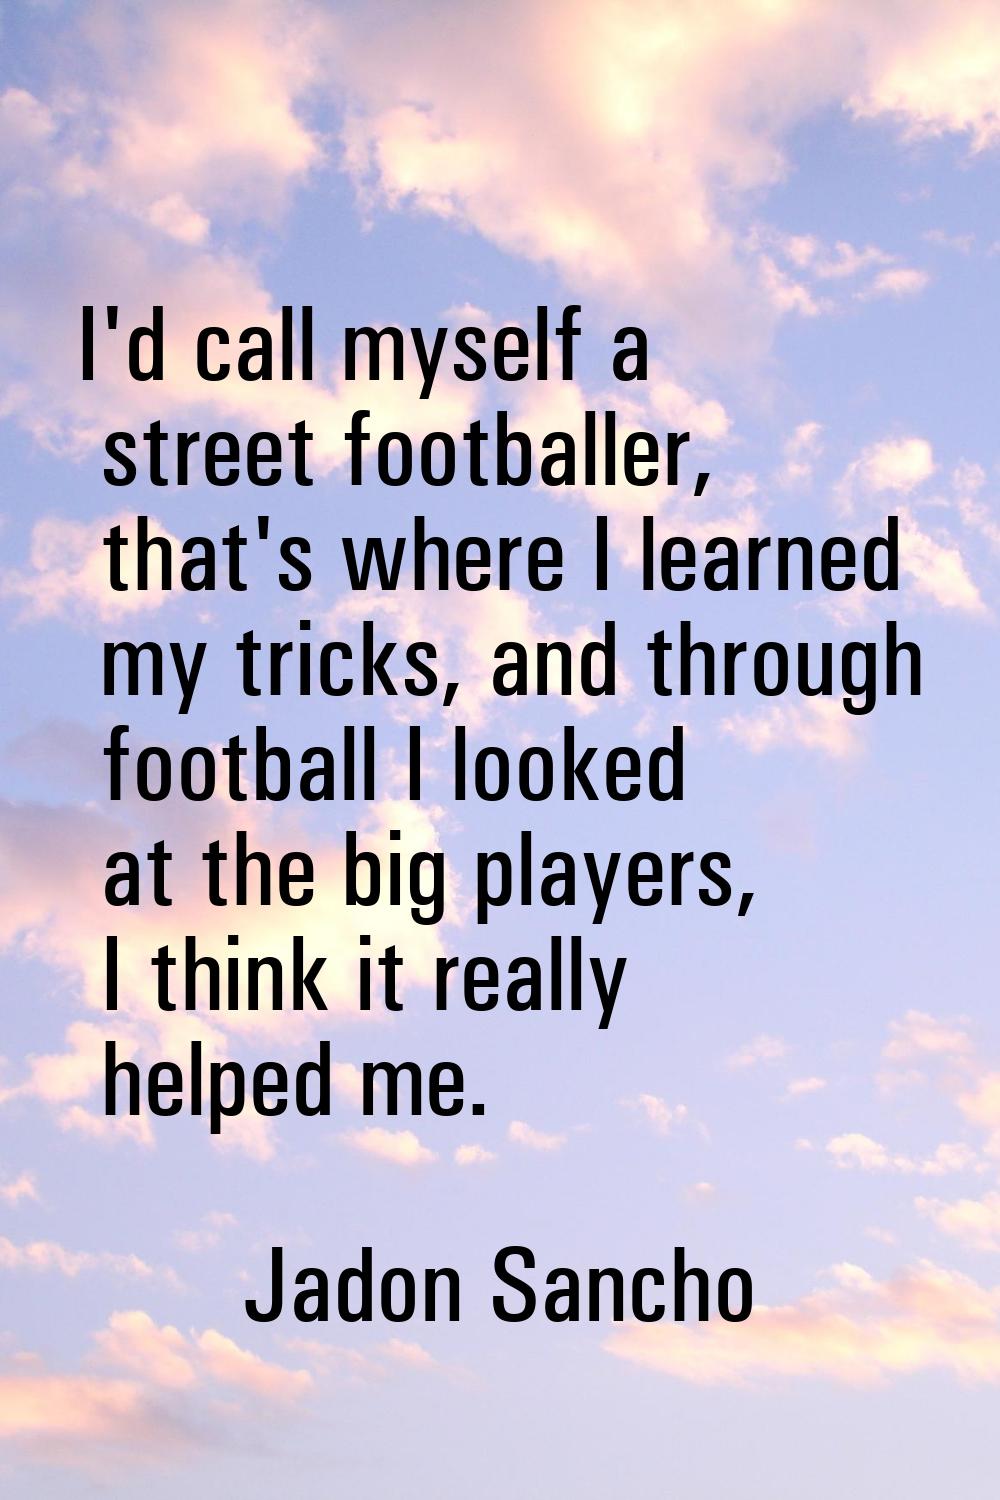 I'd call myself a street footballer, that's where I learned my tricks, and through football I looke